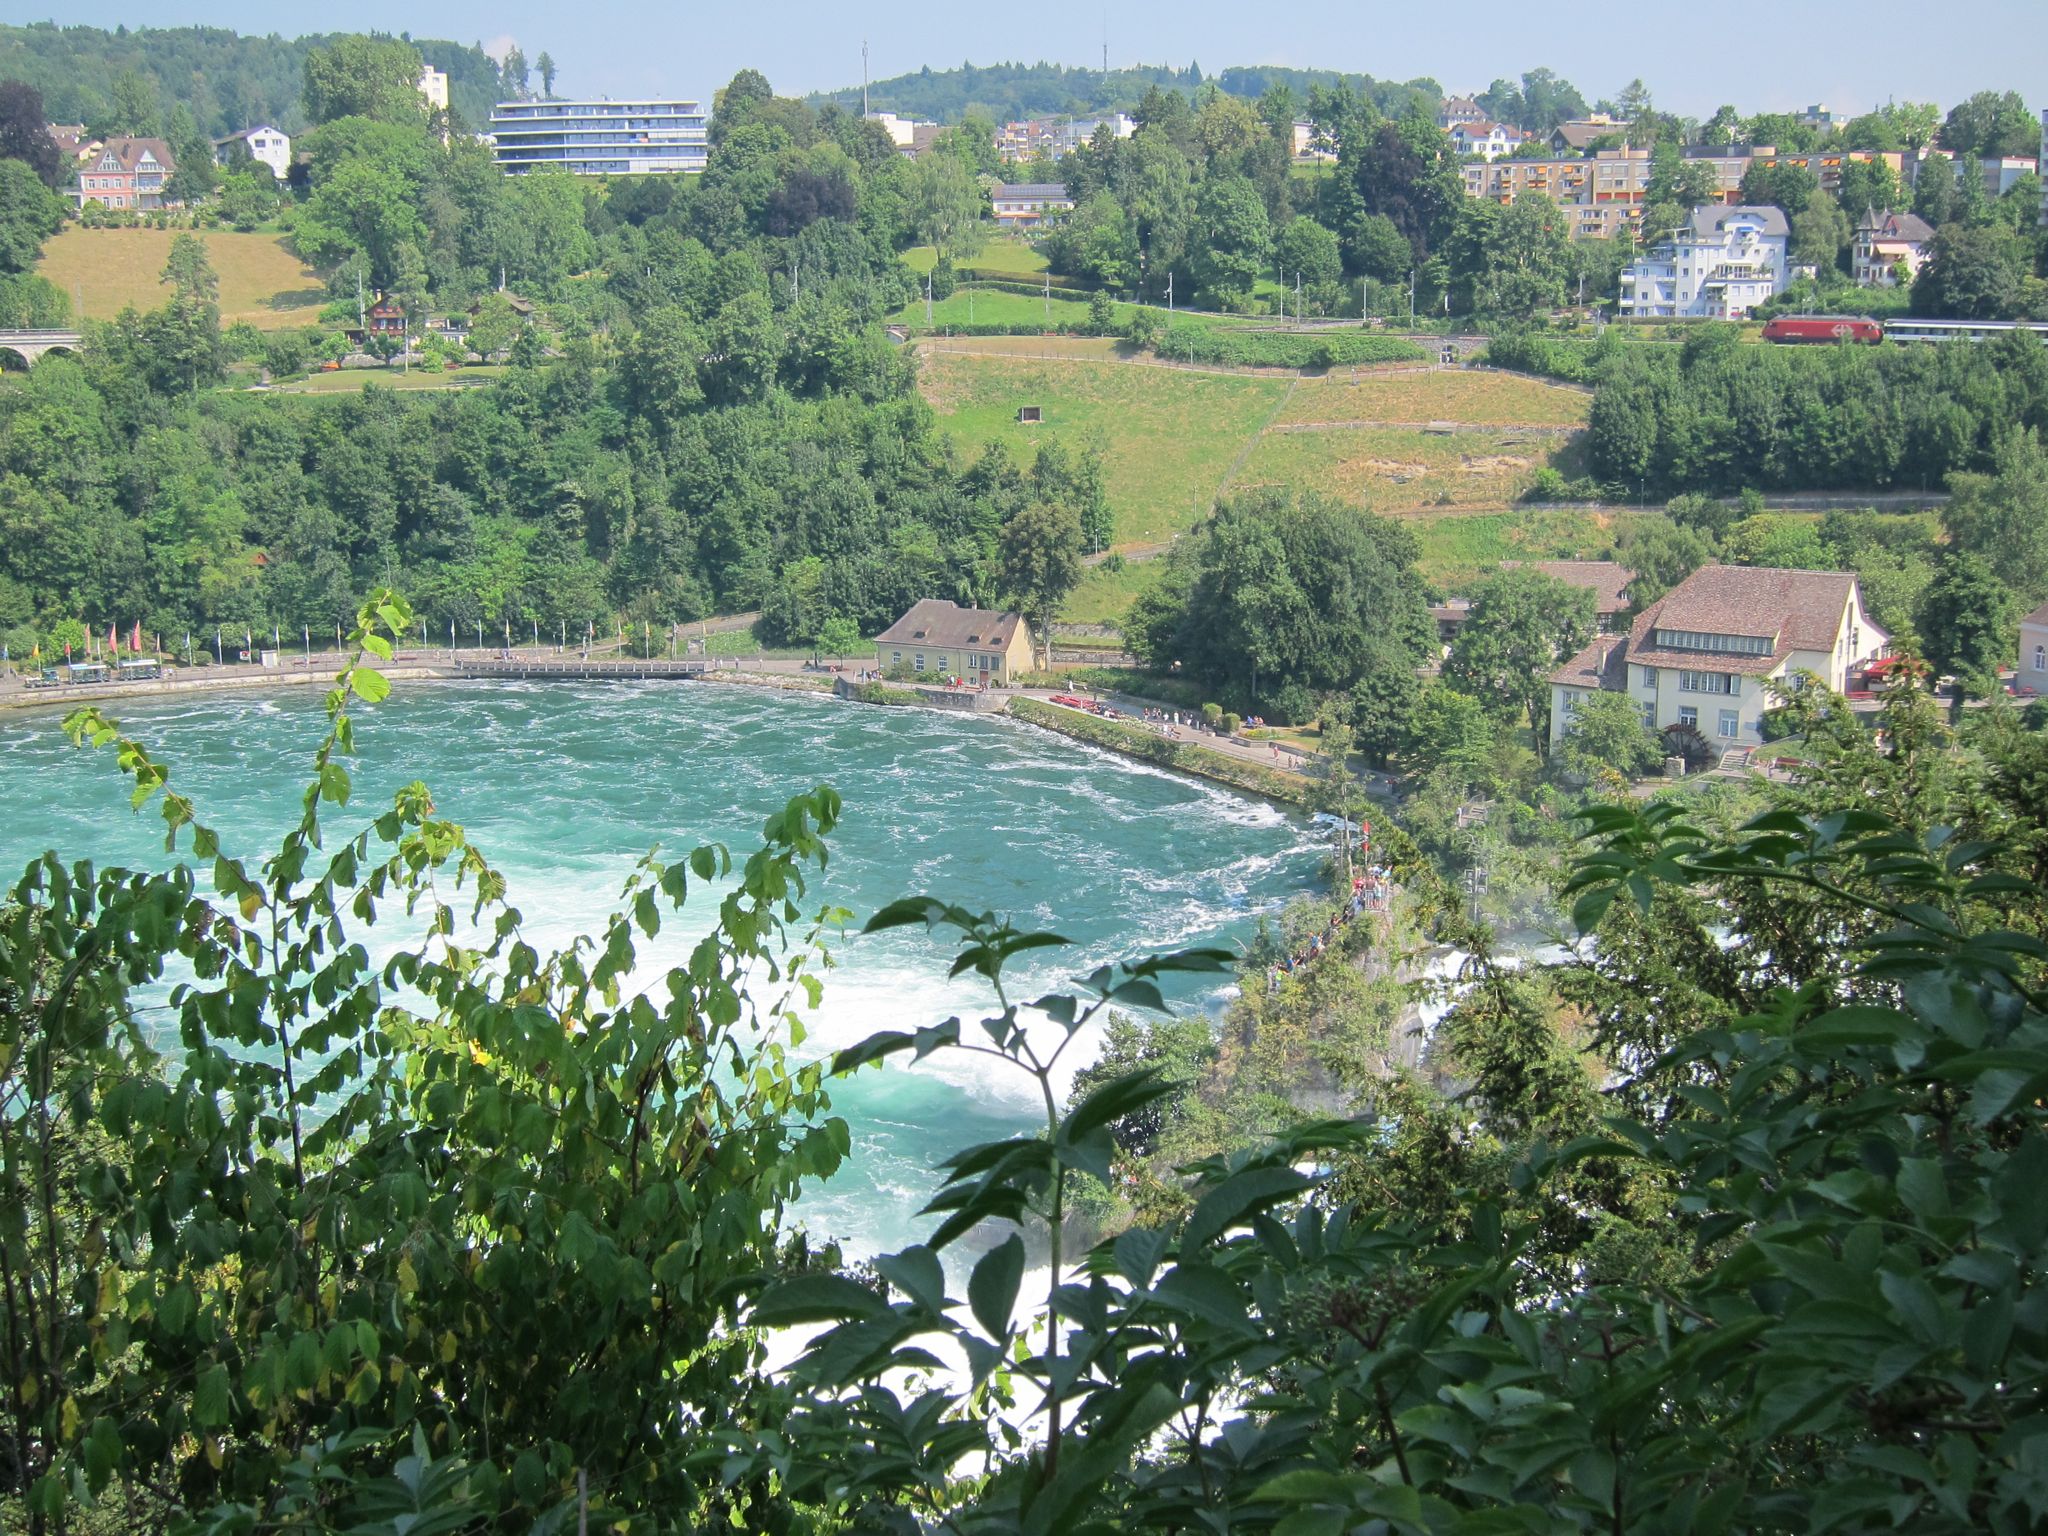 Photo 1 of 22 from the album Rheinfall.